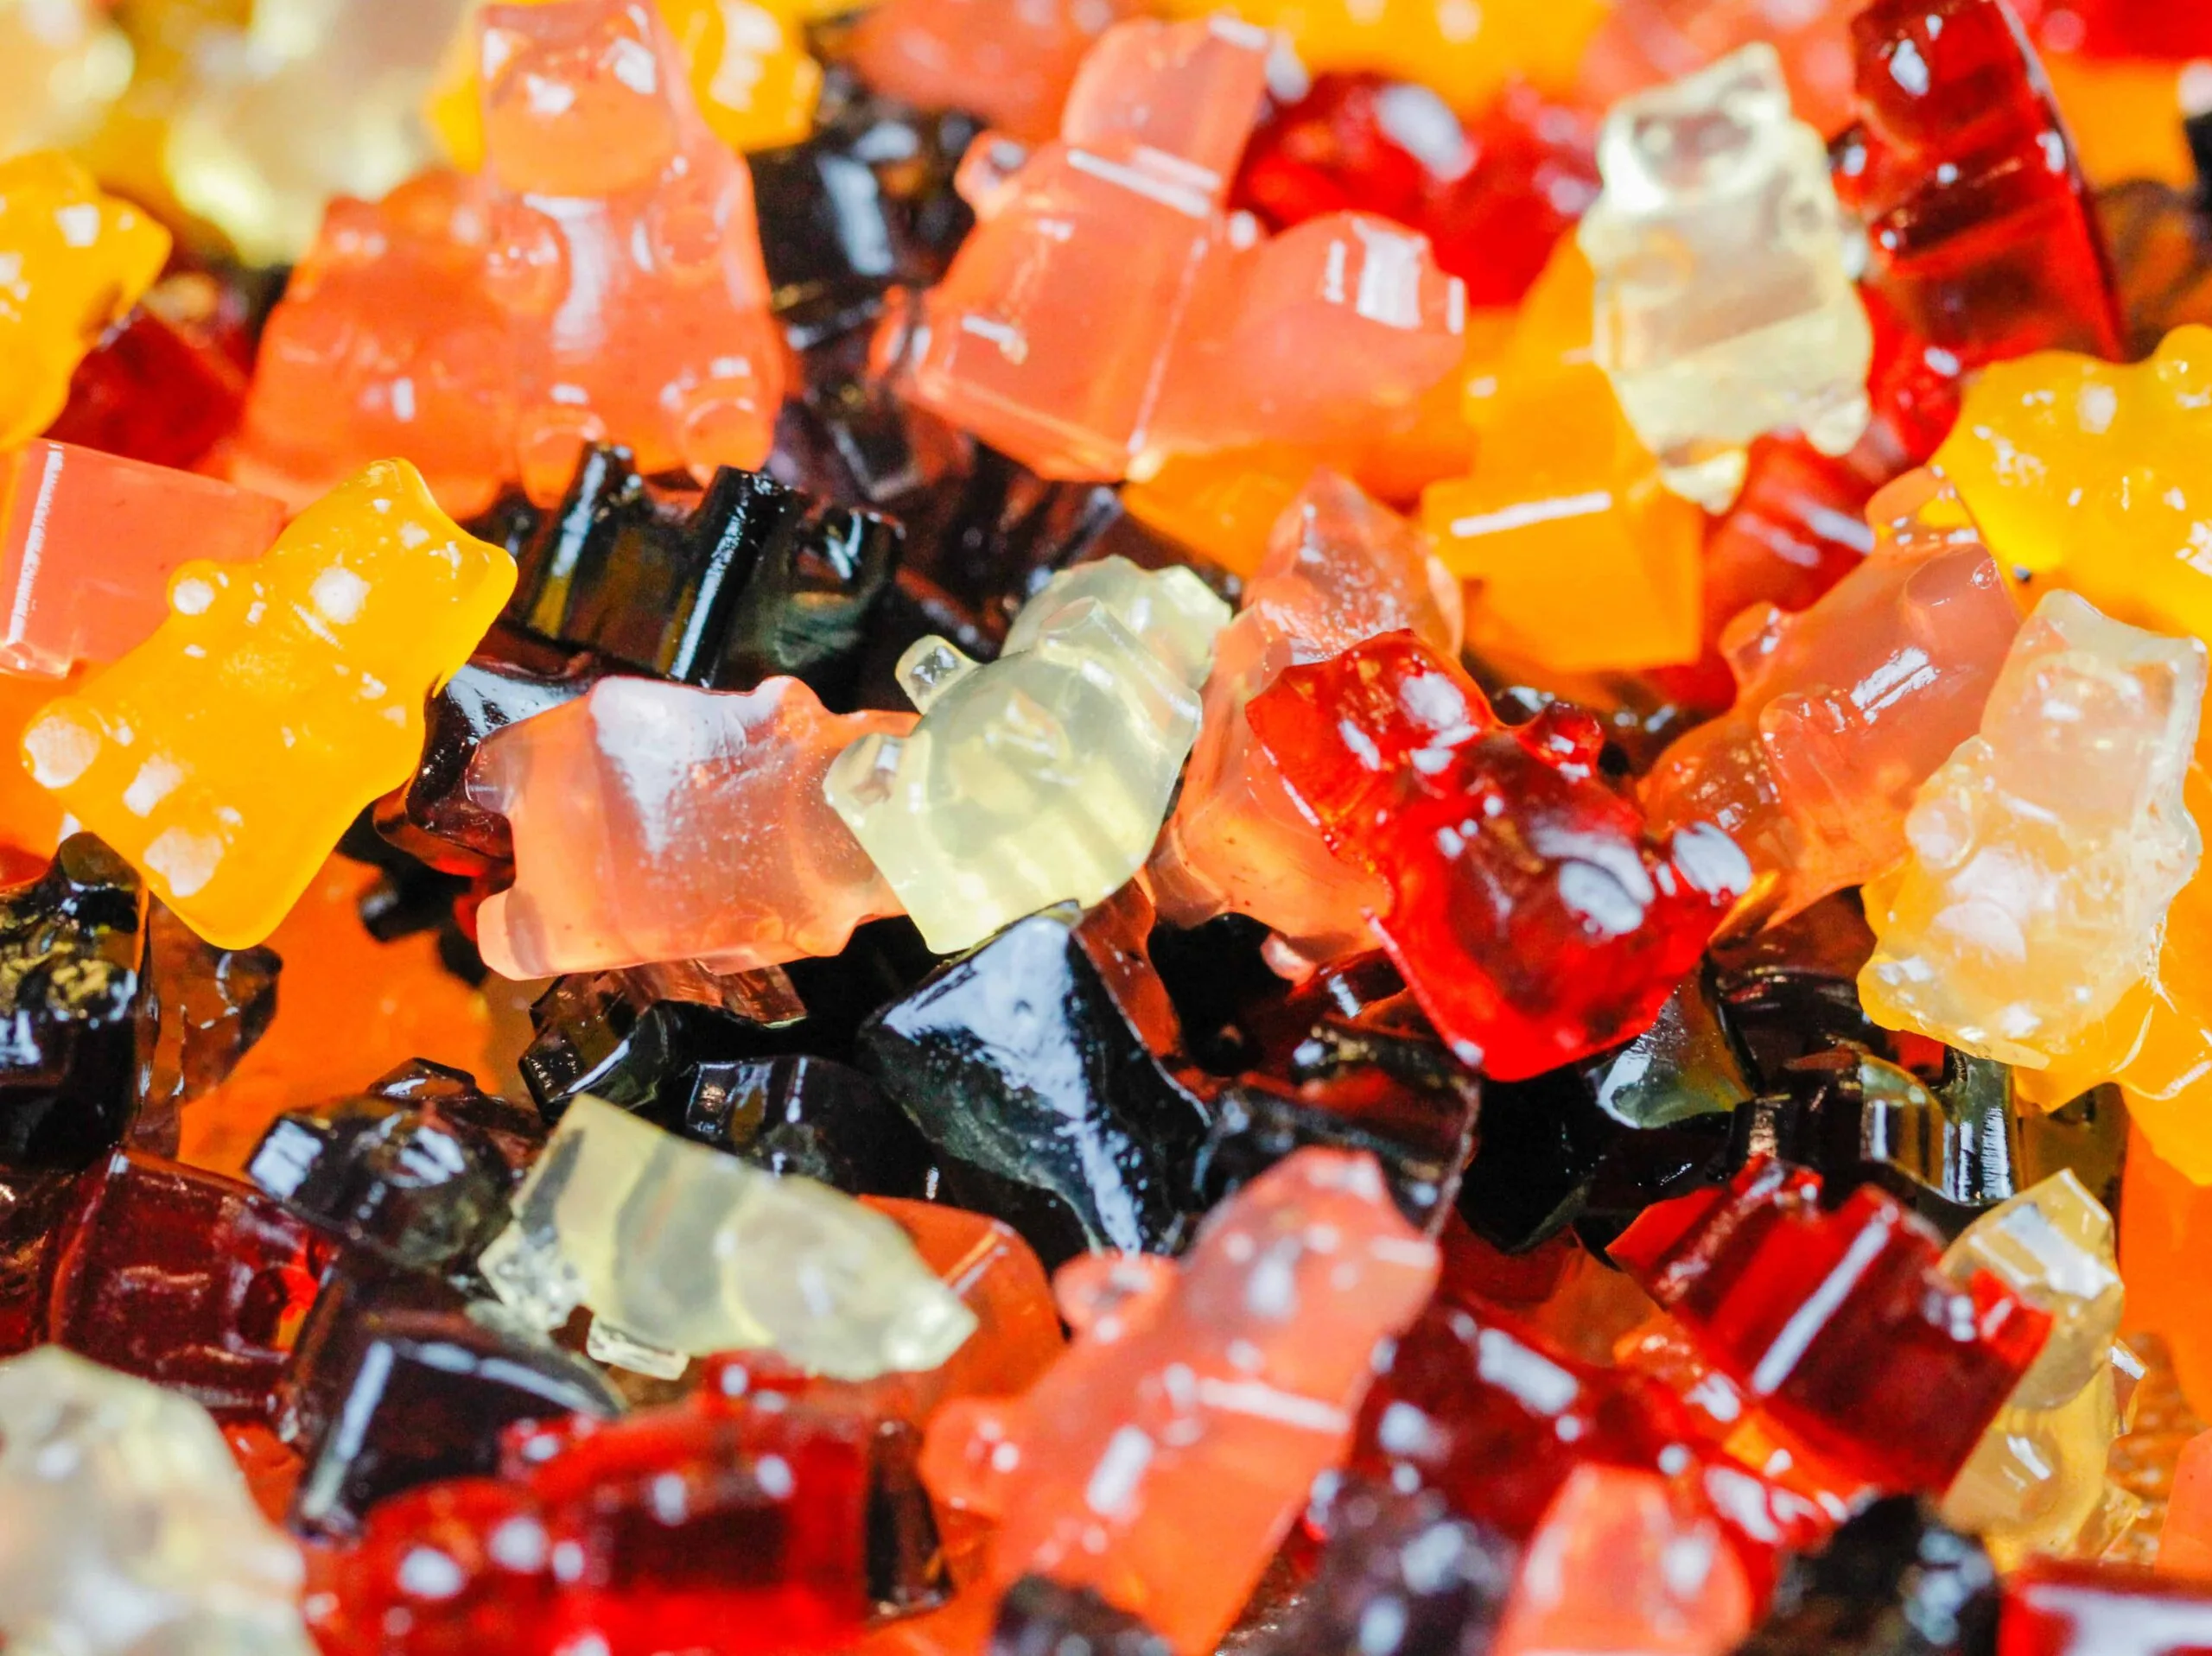 https://chelsweets.com/wp-content/uploads/2022/05/gummy-bears-mixed-together-edited-scaled.jpg.webp